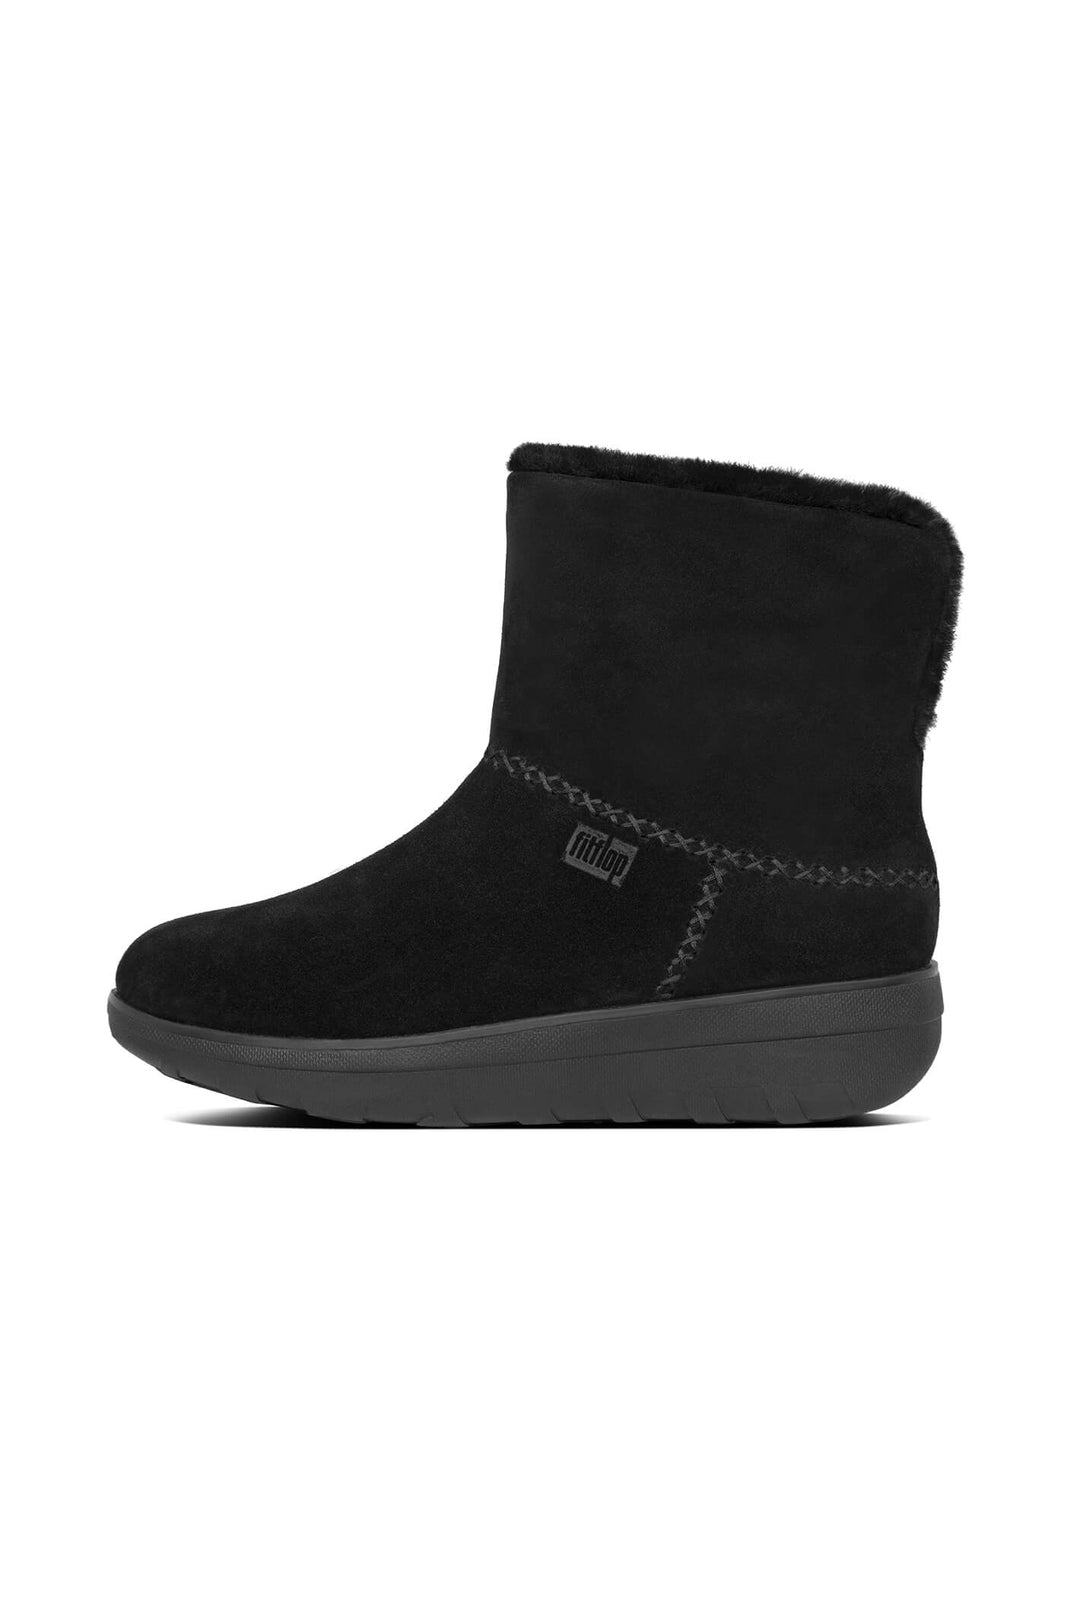 Fitflop Mukluk Shorty III Y88-090 All Black Suede Ankle Boot - Shirley Allum